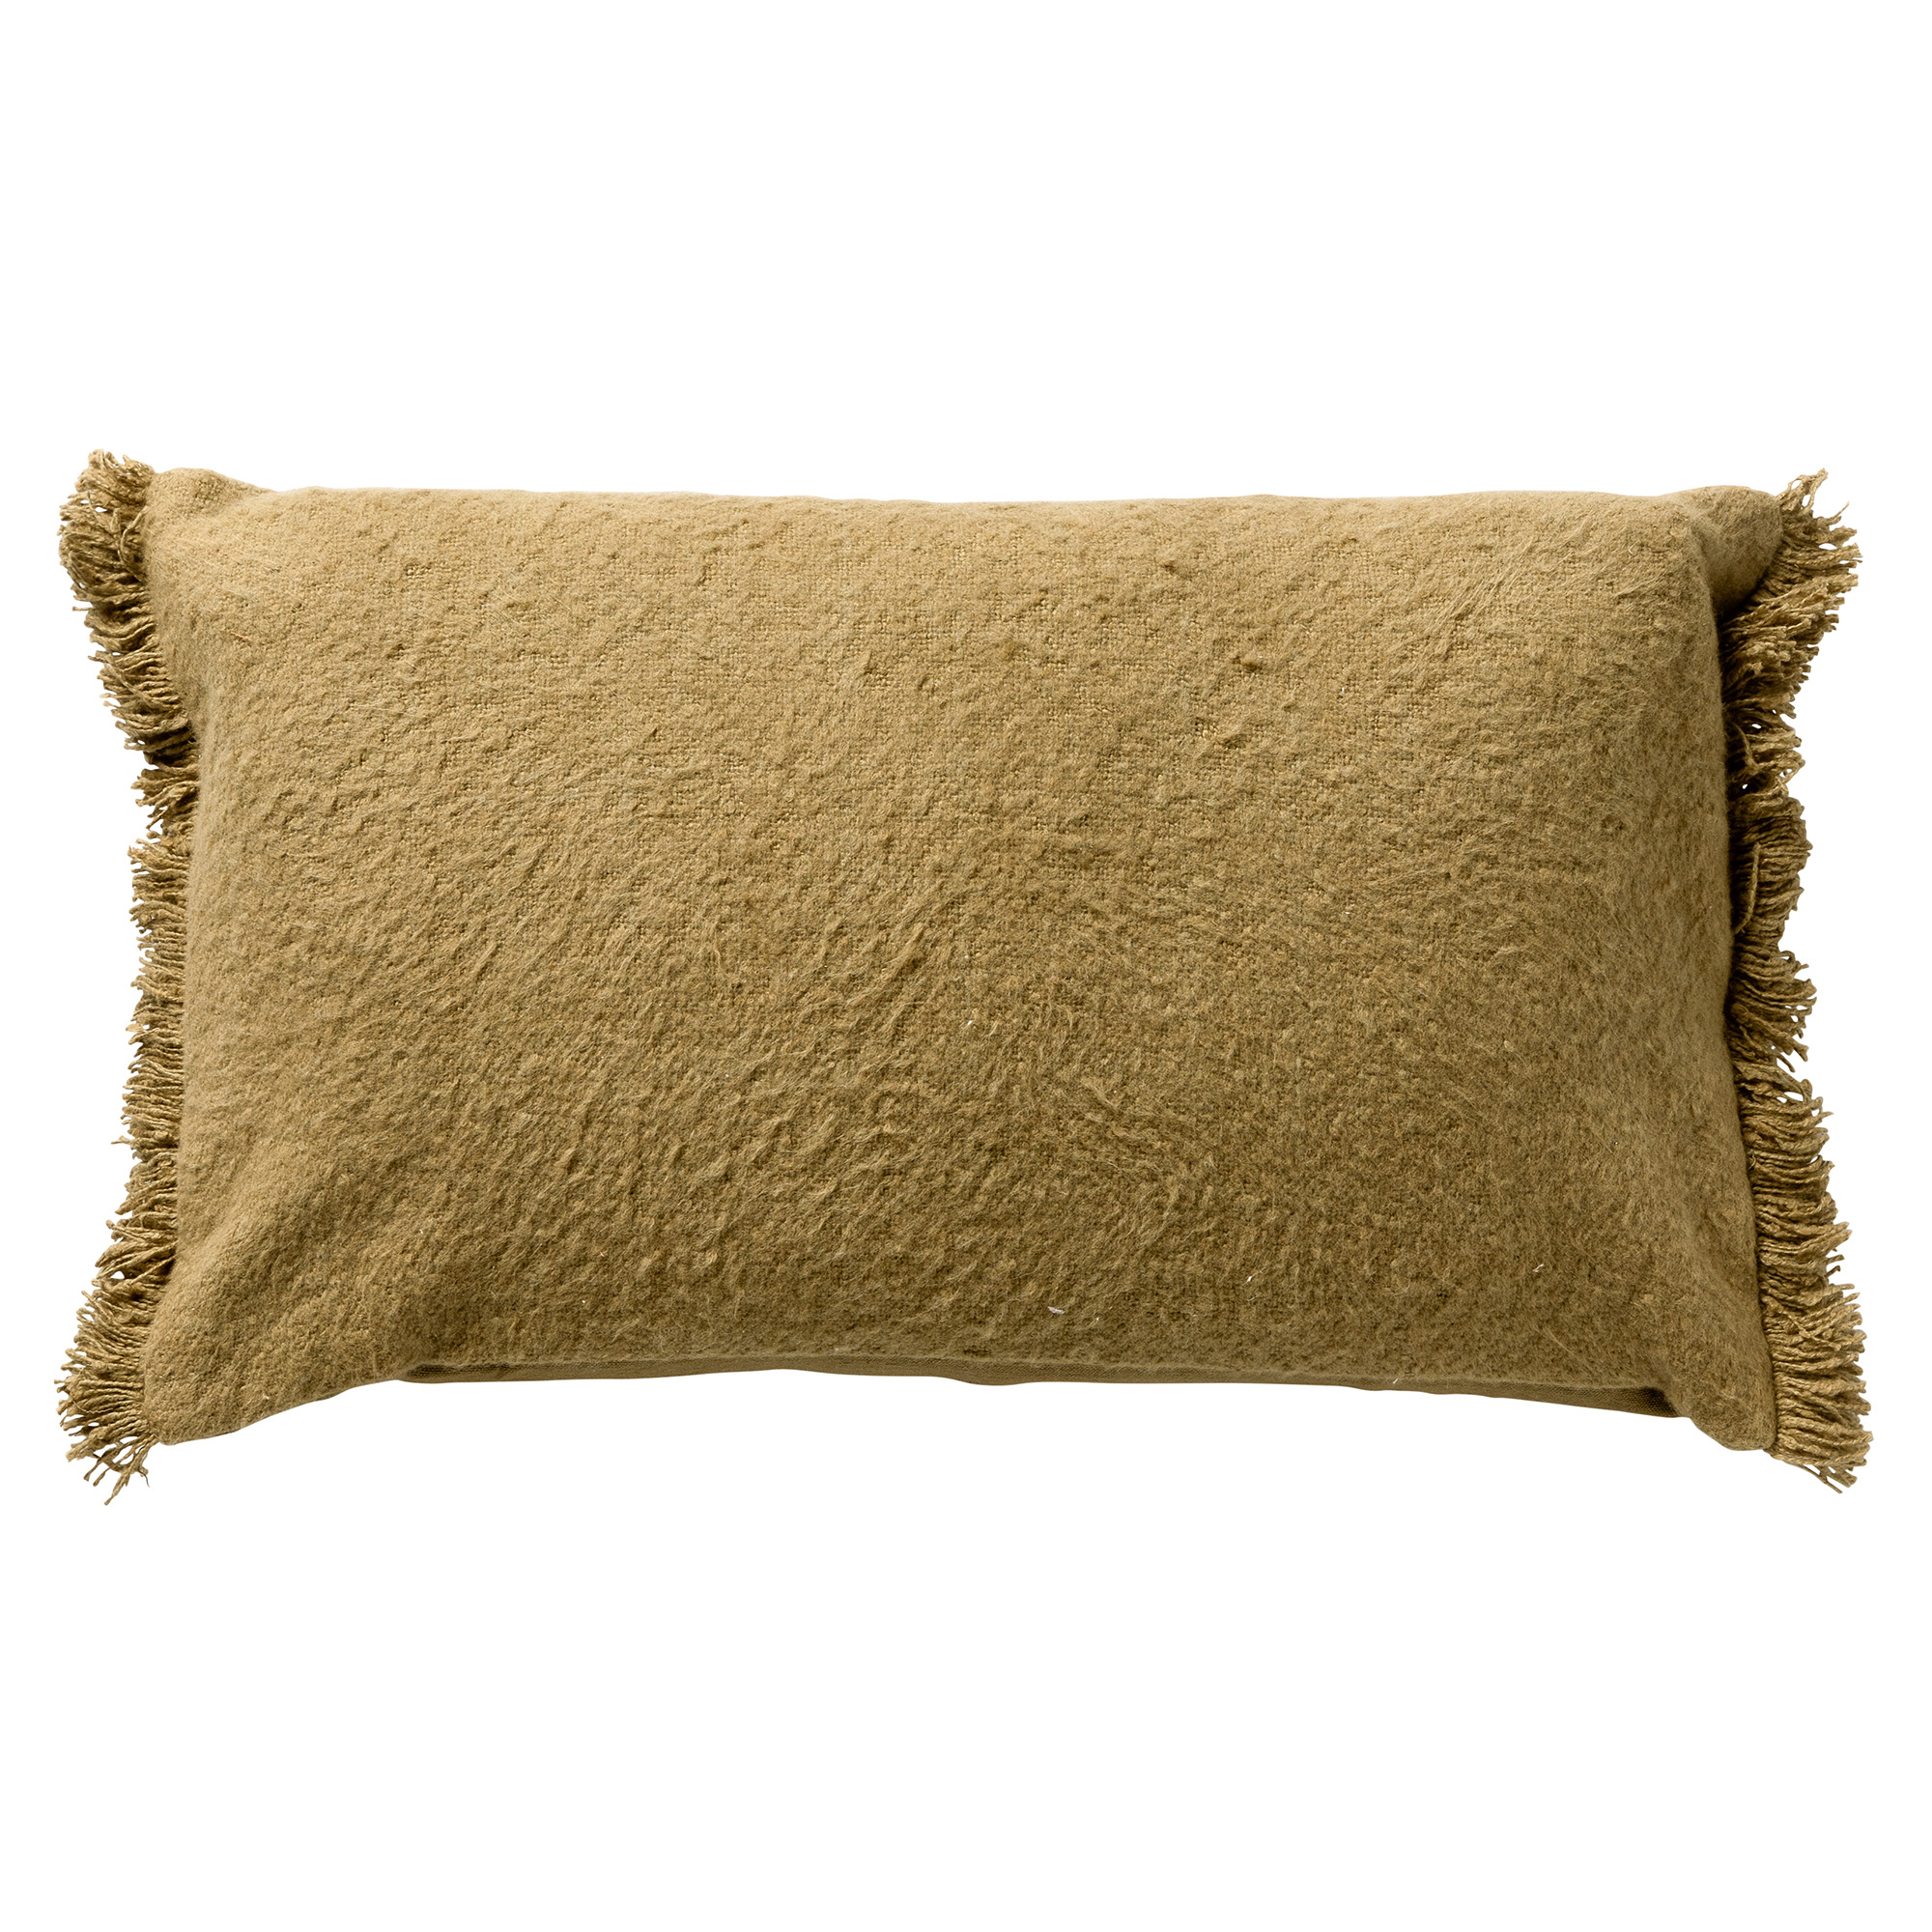 LASSE - Cushion 30x50 cm with cushion cover made of 65% reclycled cotton - Eco Line collection - Boa - green